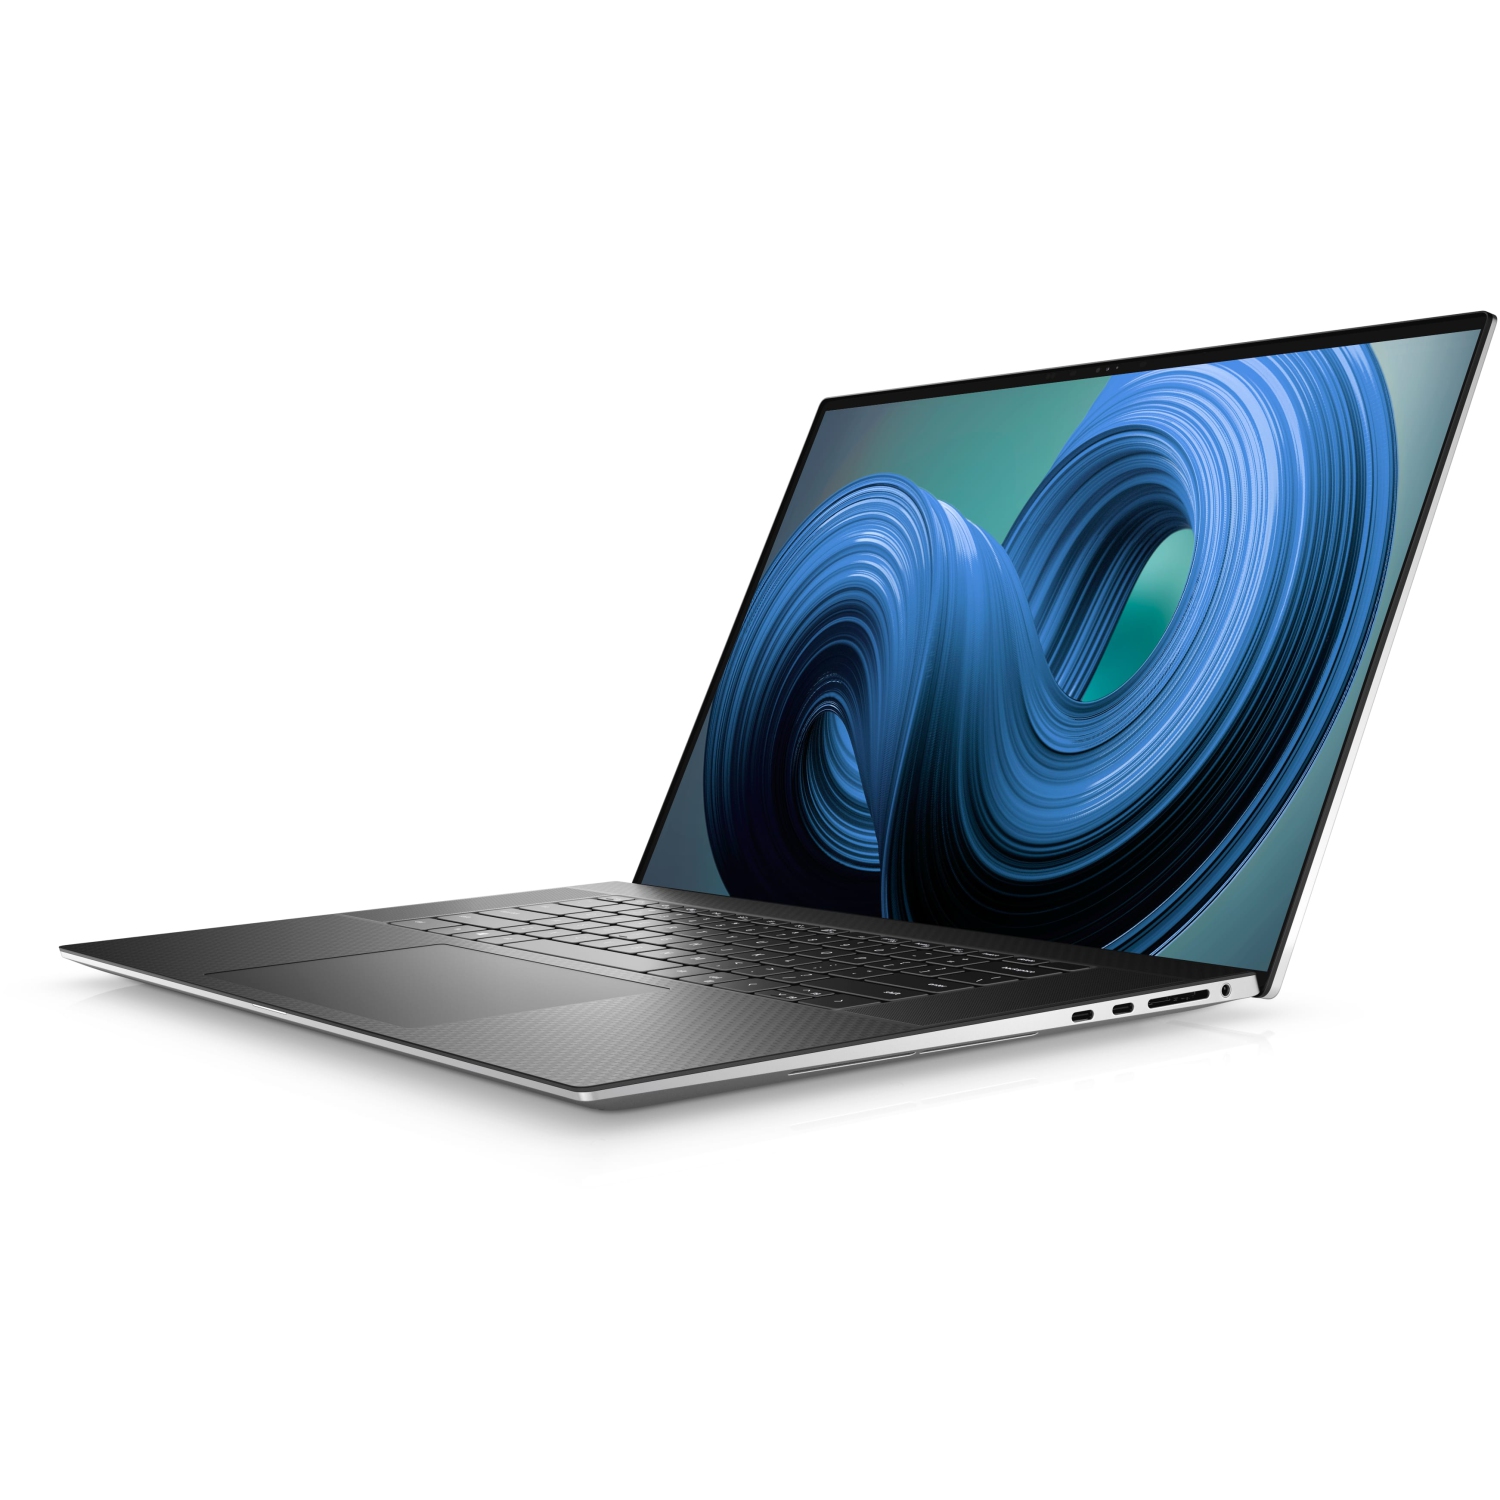 Refurbished (Excellent) – Dell XPS 9720 Laptop (2022) | 17" FHD+ | Core i7 - 8TB SSD - 64GB RAM - RTX 3060 | 14 Cores @ 4.7 GHz - 12th Gen CPU - 12GB GDDR6